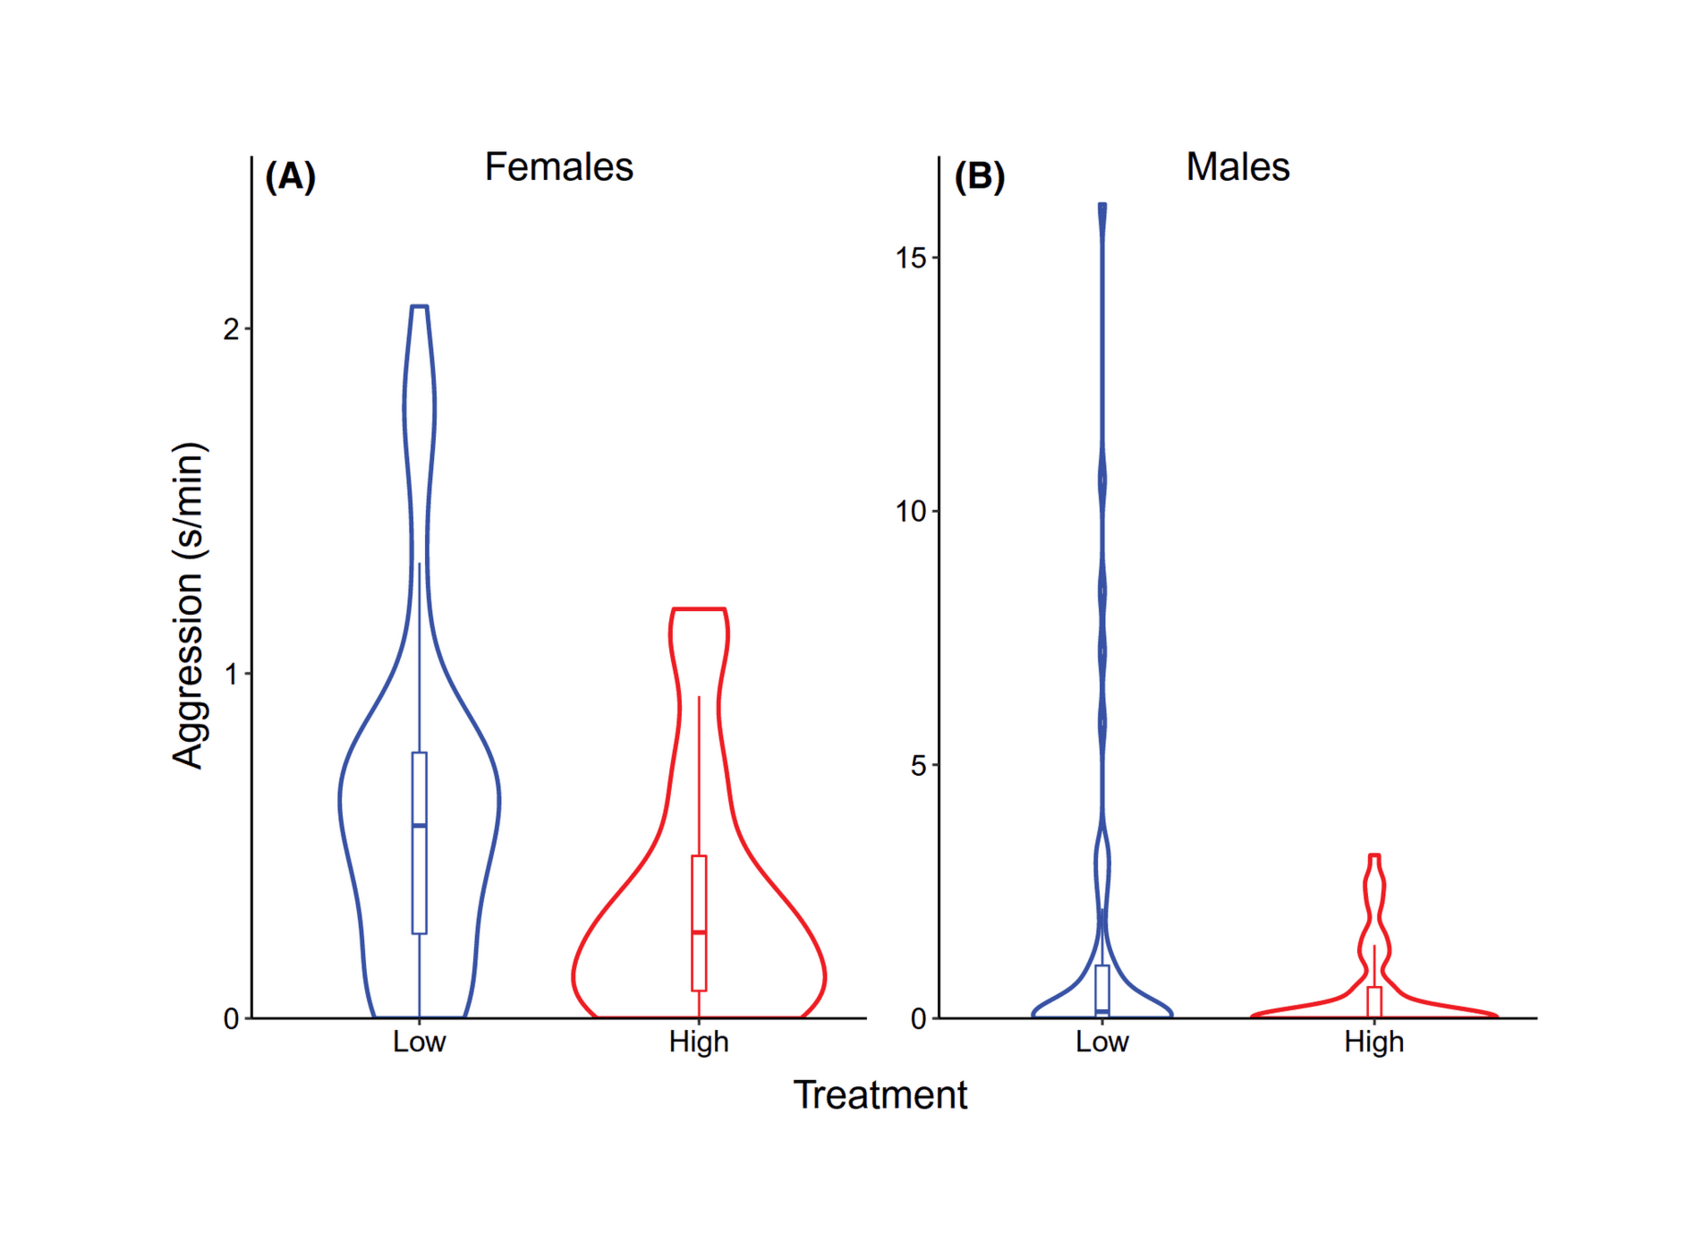 Figure 4: Aggression frequency in (A) females and (B) males from the selection treatments after 25 generations of selection. Inner box plots show median, interquartile range (IQR), and whiskers up to 1.5 × IQR. Outer violin plots show the shape of the distribution of the data.